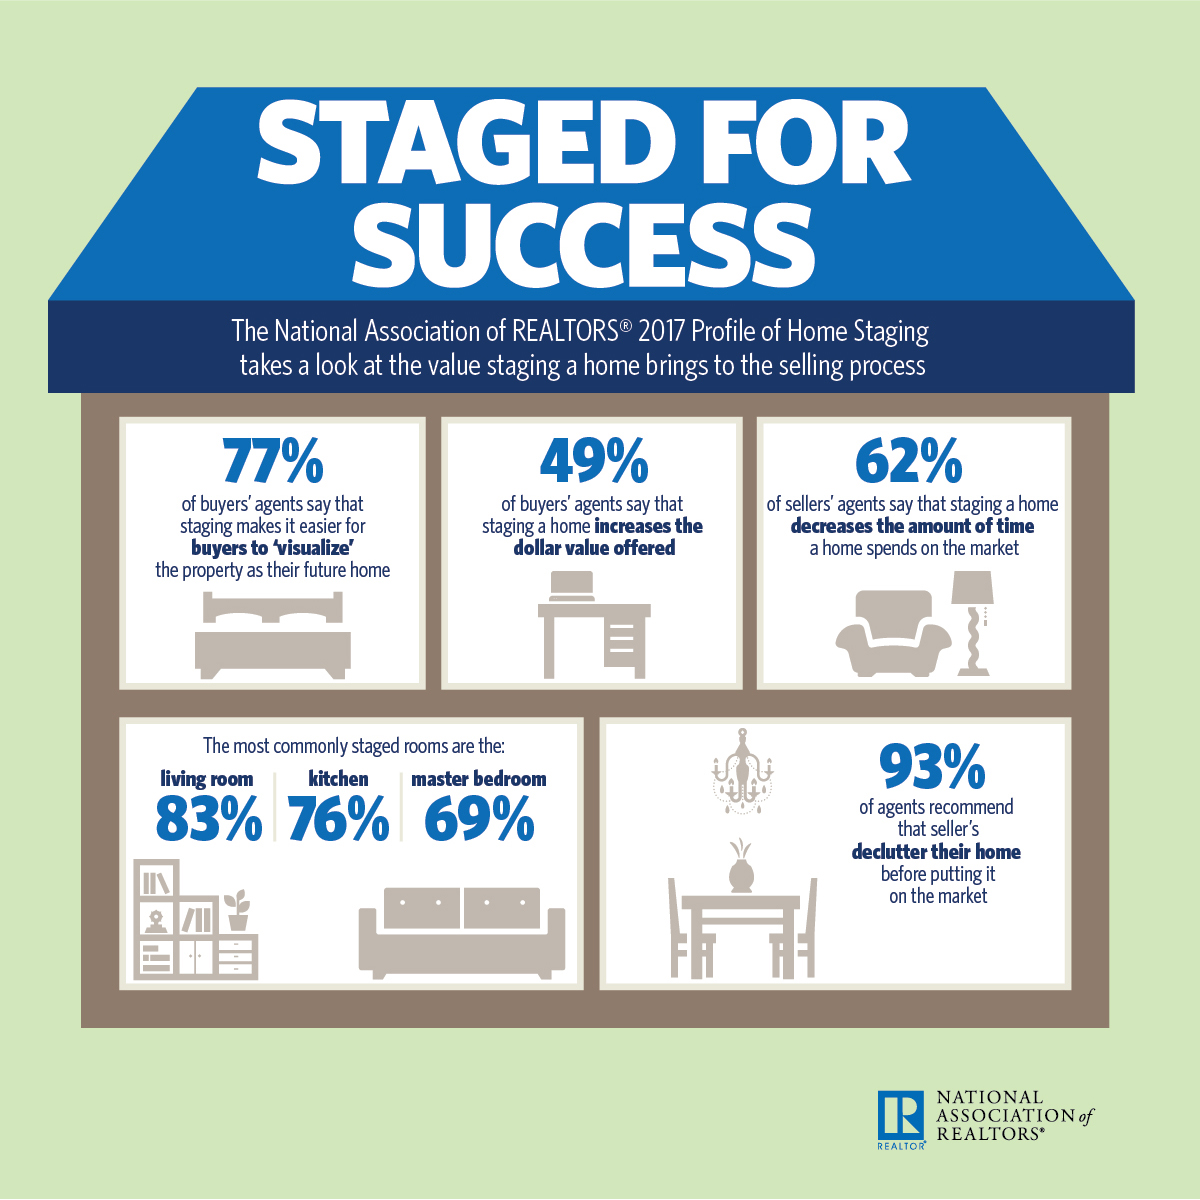 nar home staging decreases time on the market finds realtors report